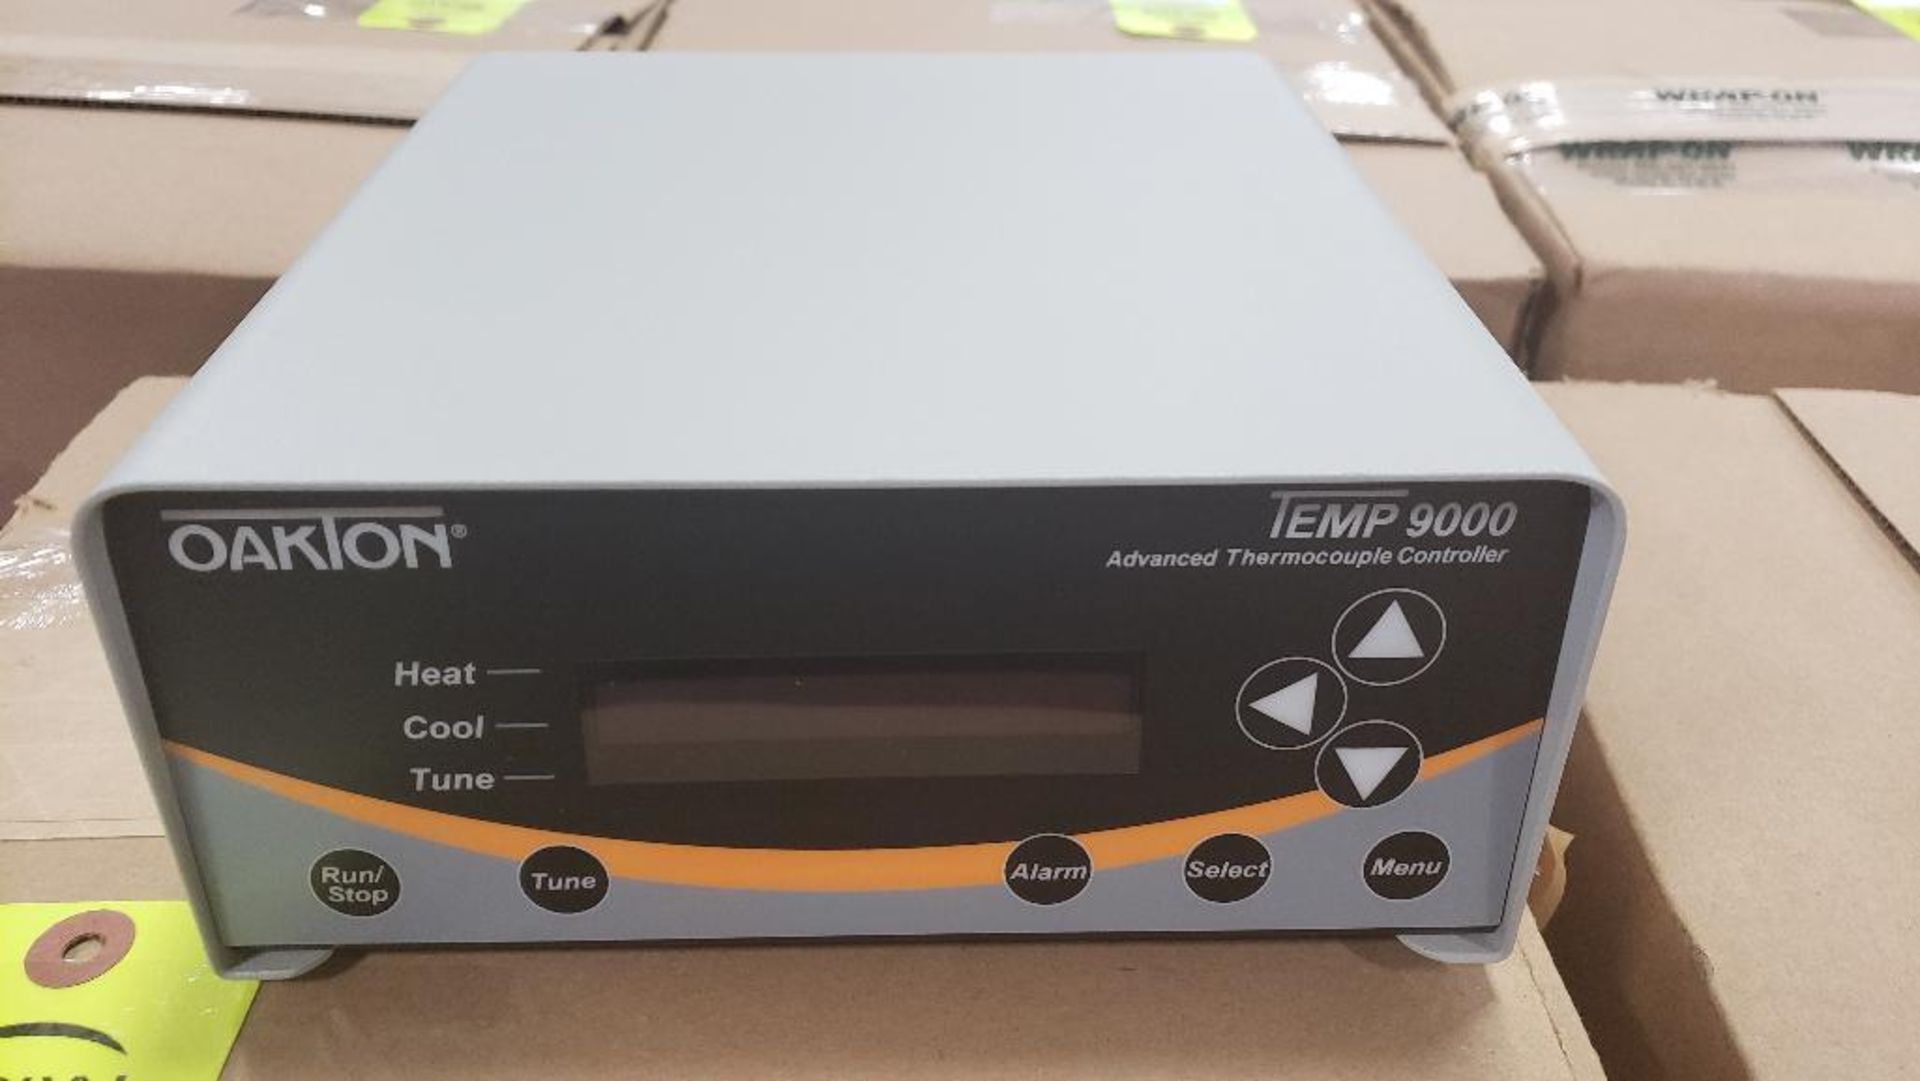 Oakton Temp 9000 model 89800-02 advanced thermocouple controller. Marked as reconditioned. - Image 2 of 4